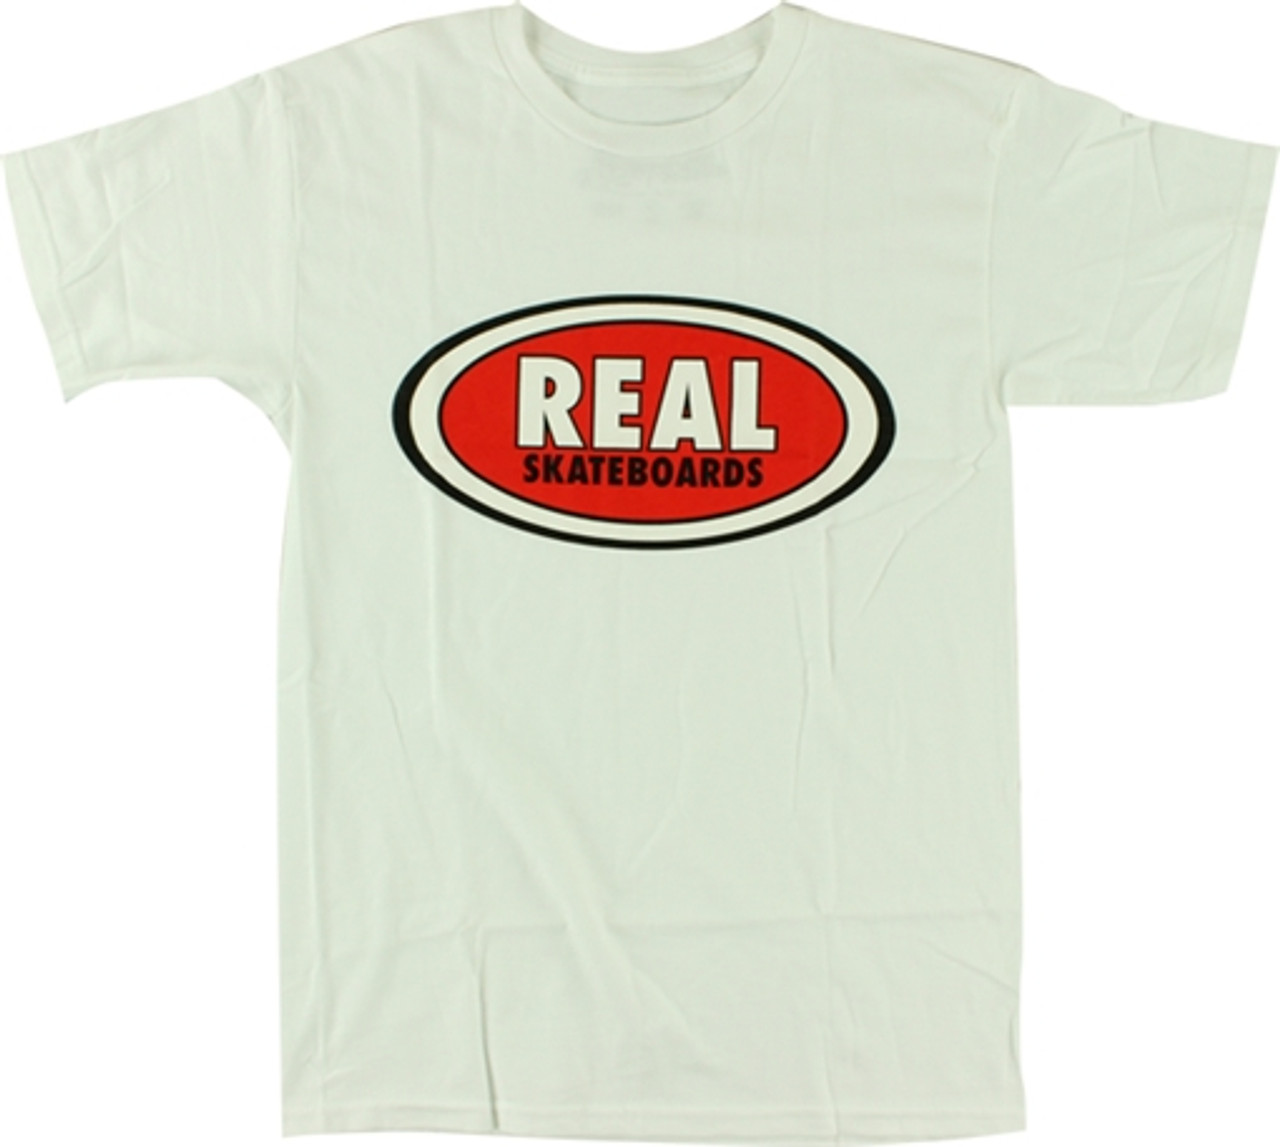 REAL OG OVAL SS TSHIRT SMALL WHT/RED/BLK